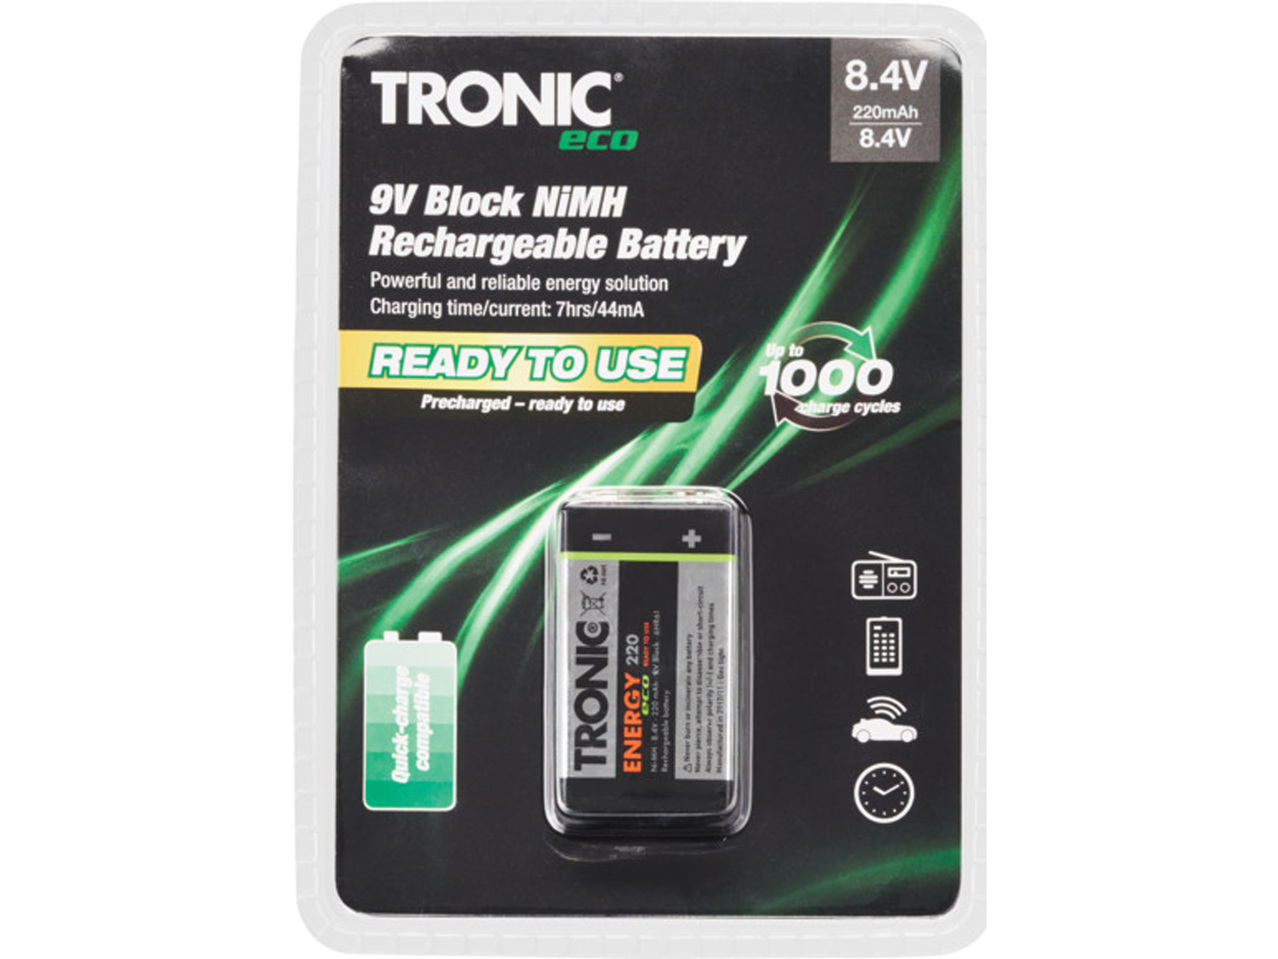 TRONIC Rechargeable Battery Assortment